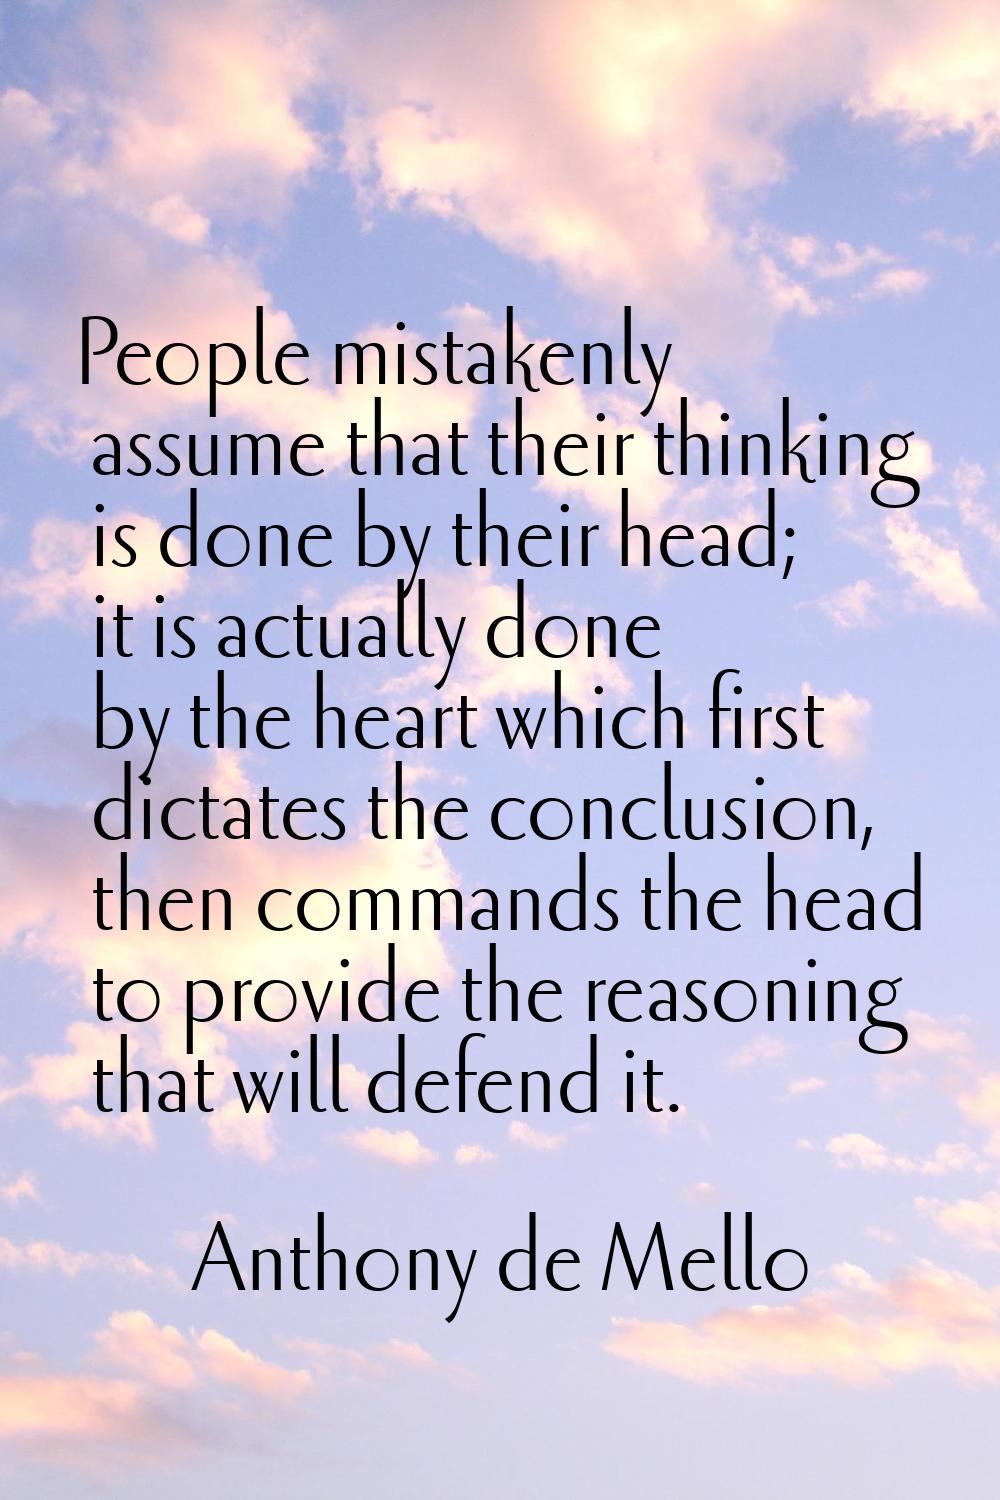 People mistakenly assume that their thinking is done by their head; it is actually done by the hear